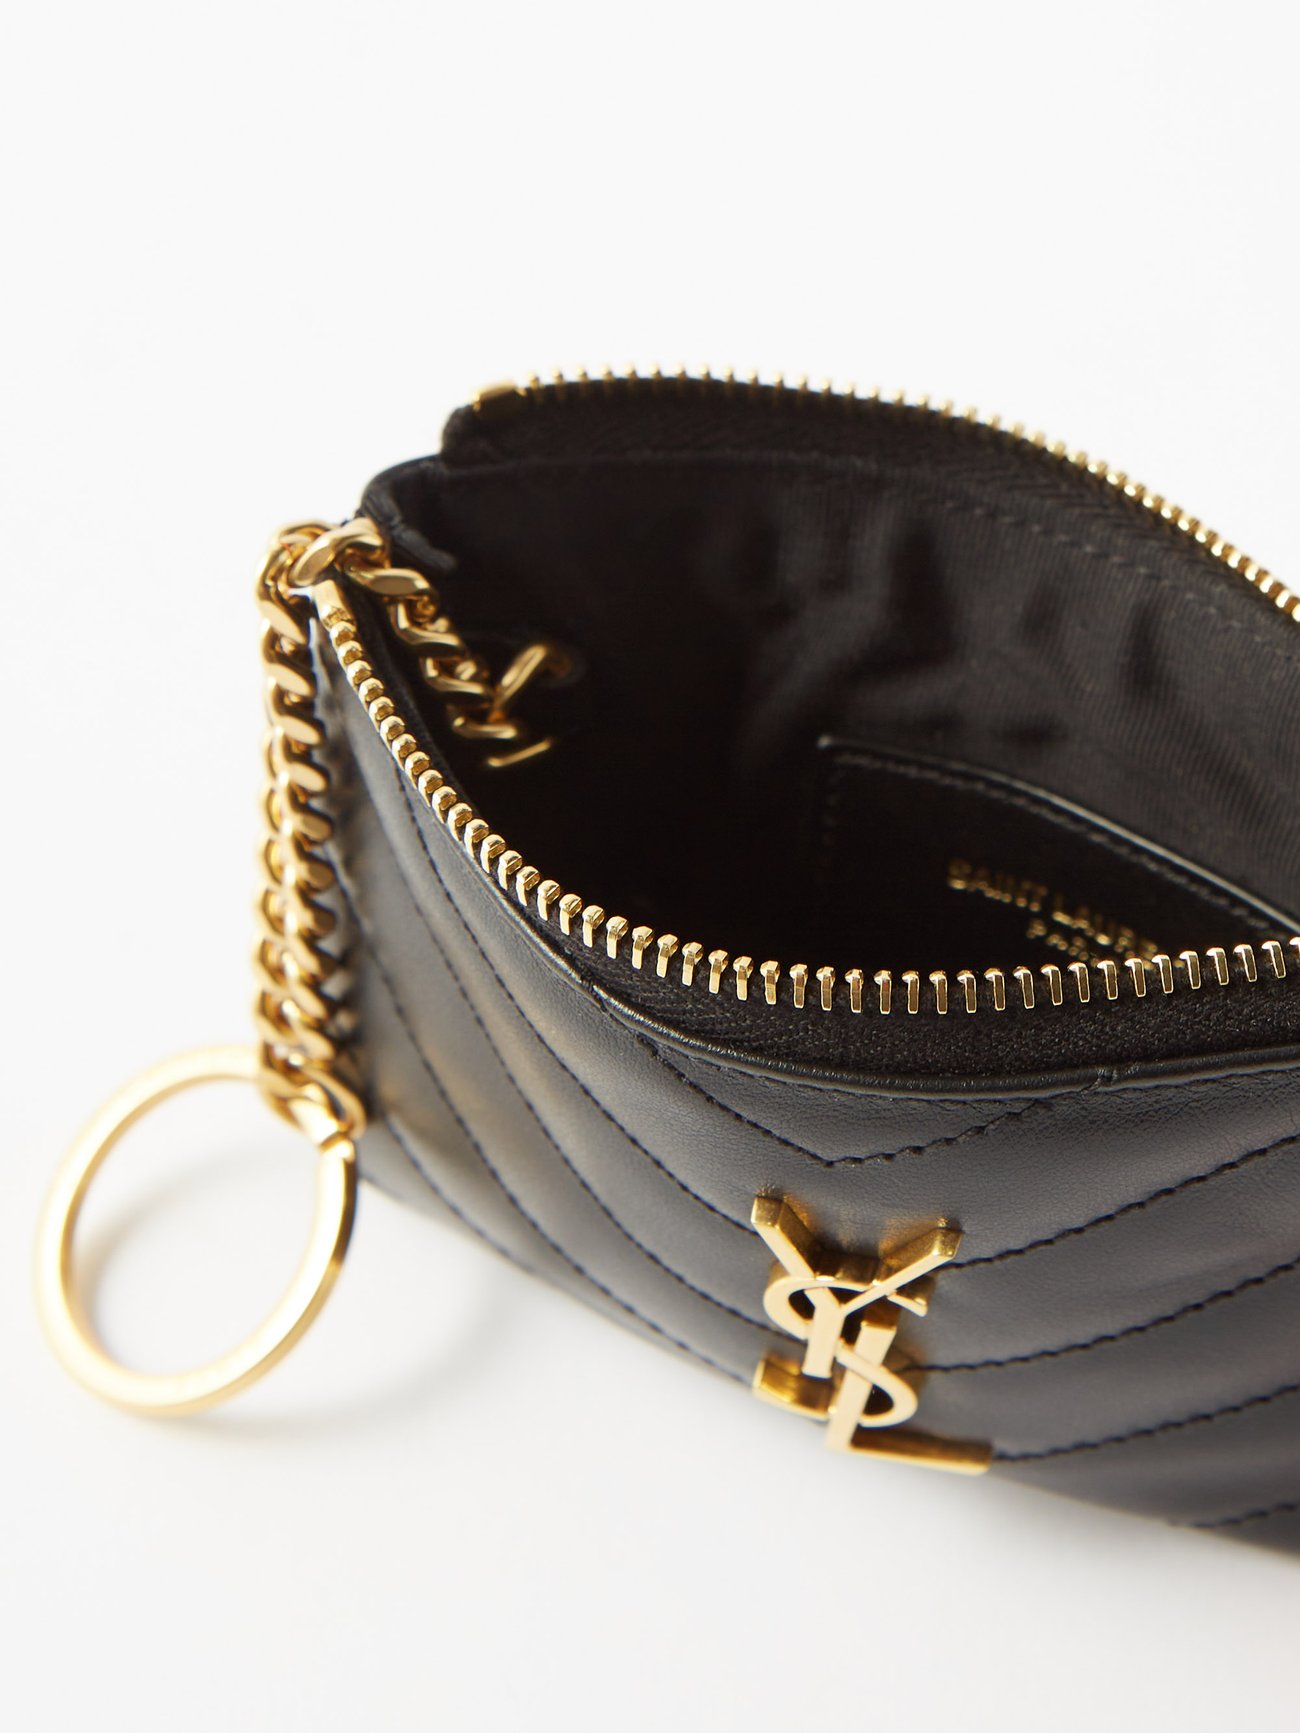 YSL bags and accessories | Still in Fashion, pre-owned luxury goods